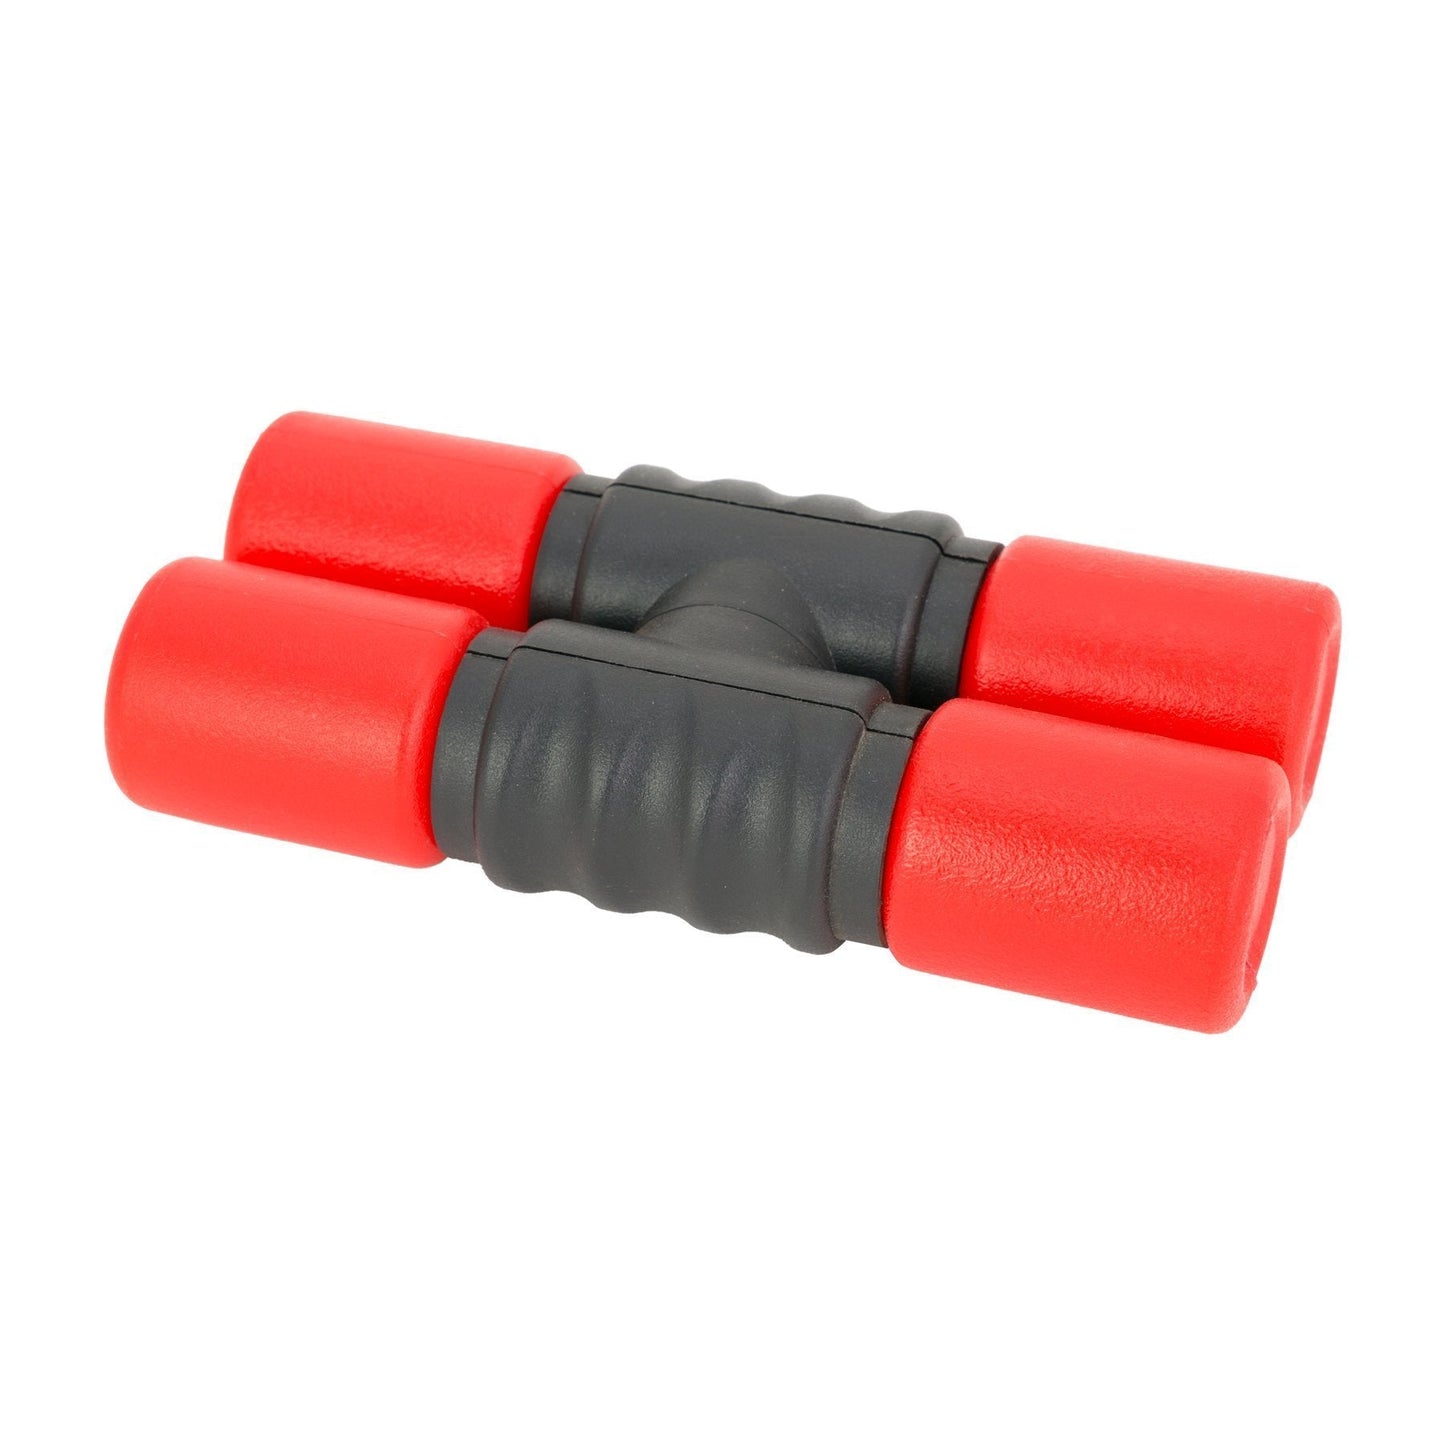 Drumfire ABS Double Shaker (Red)